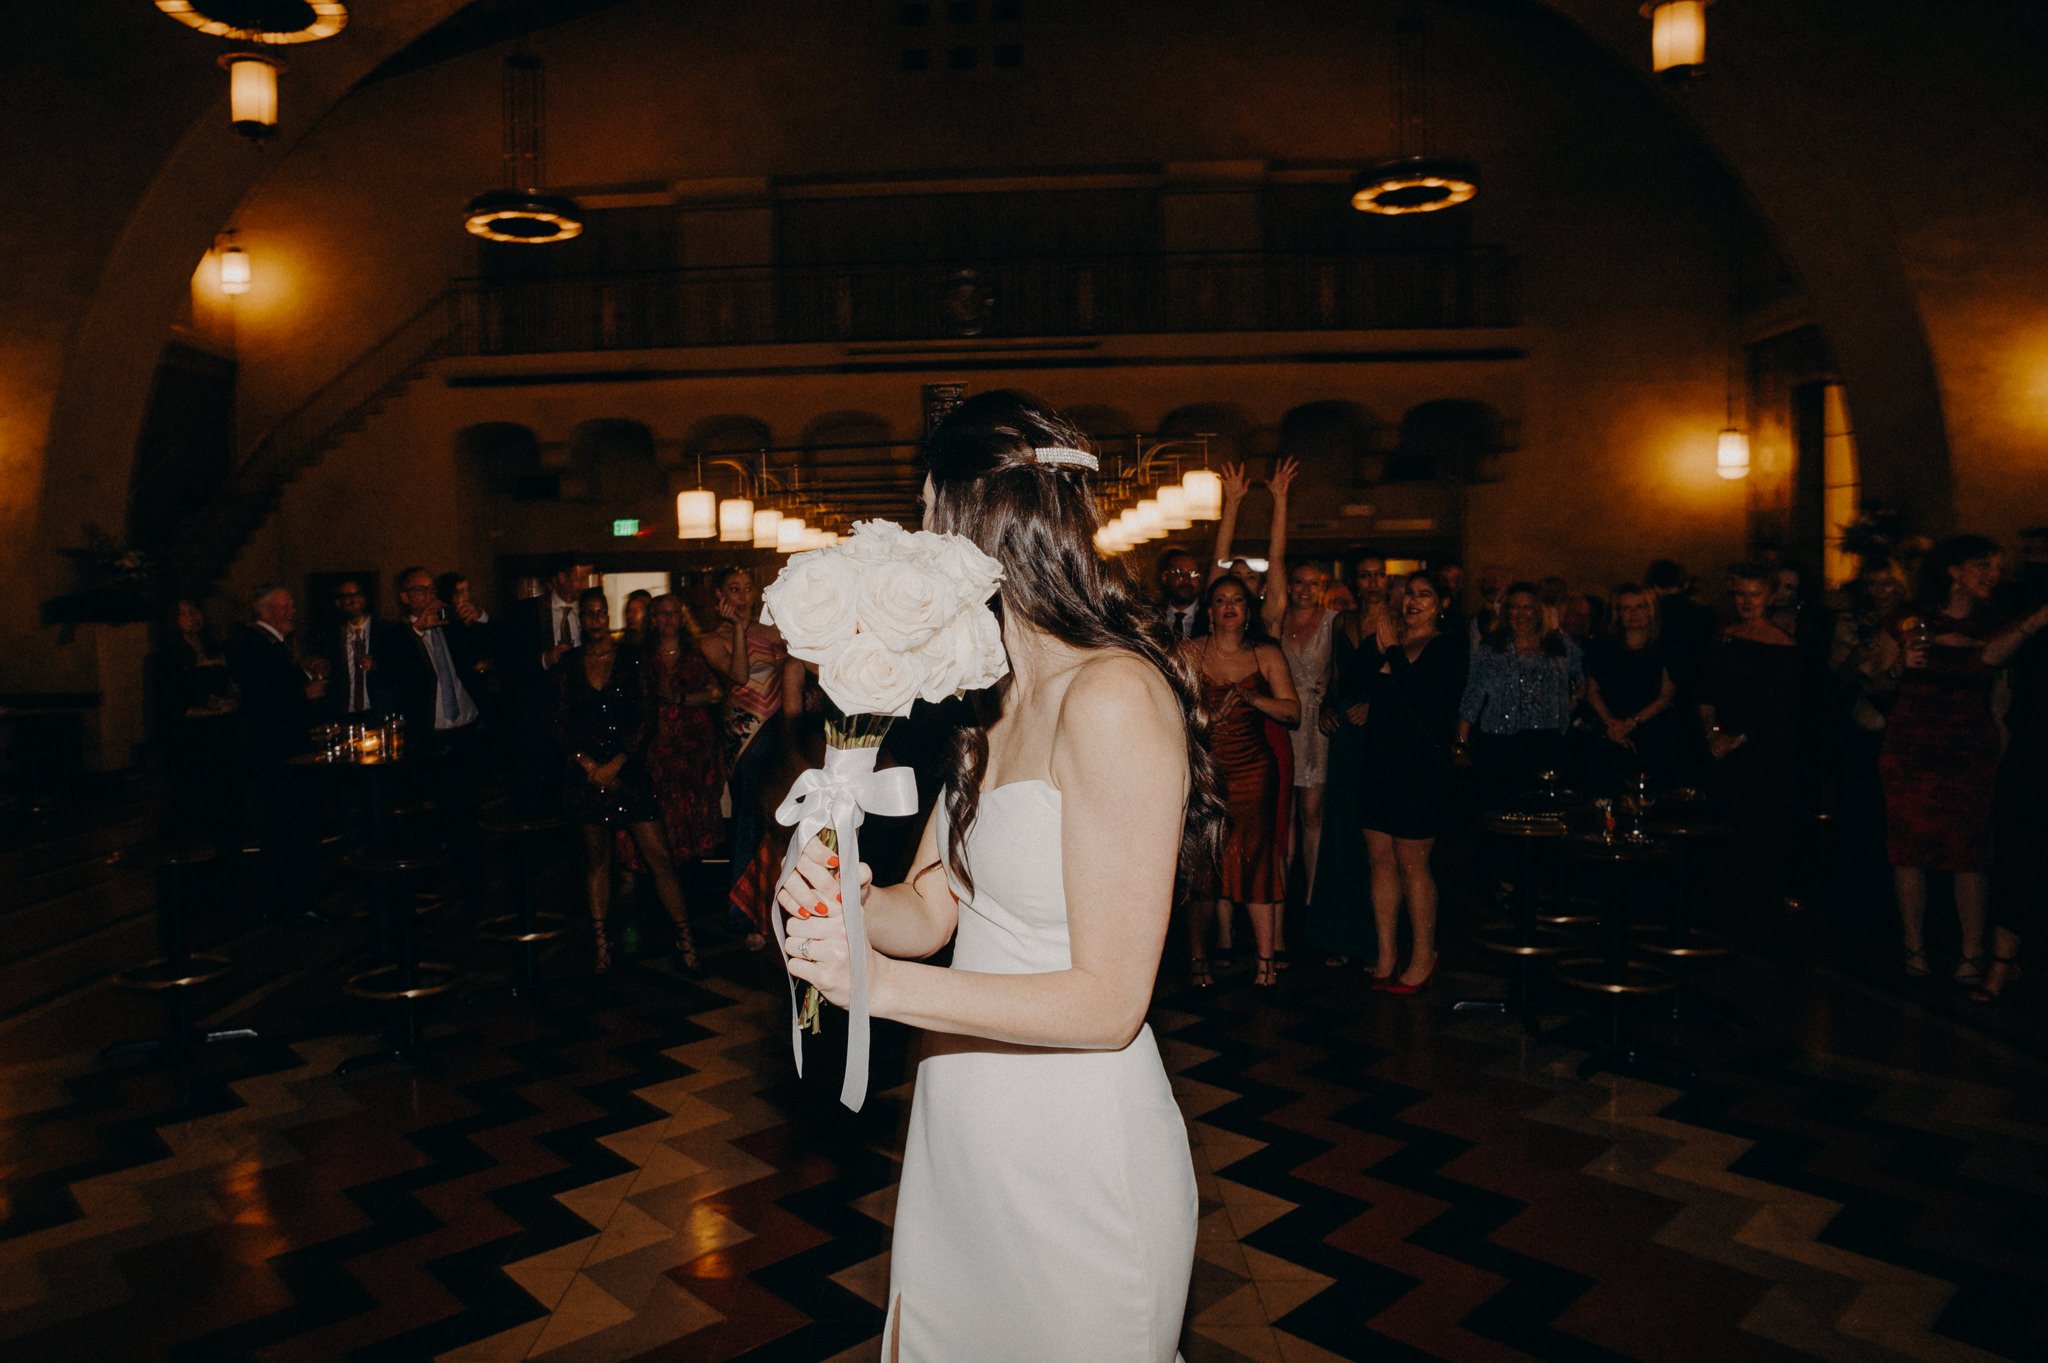 union station home bound brewery wedding - wedding photographers in los angeles - itlaphoto.com-122.jpg